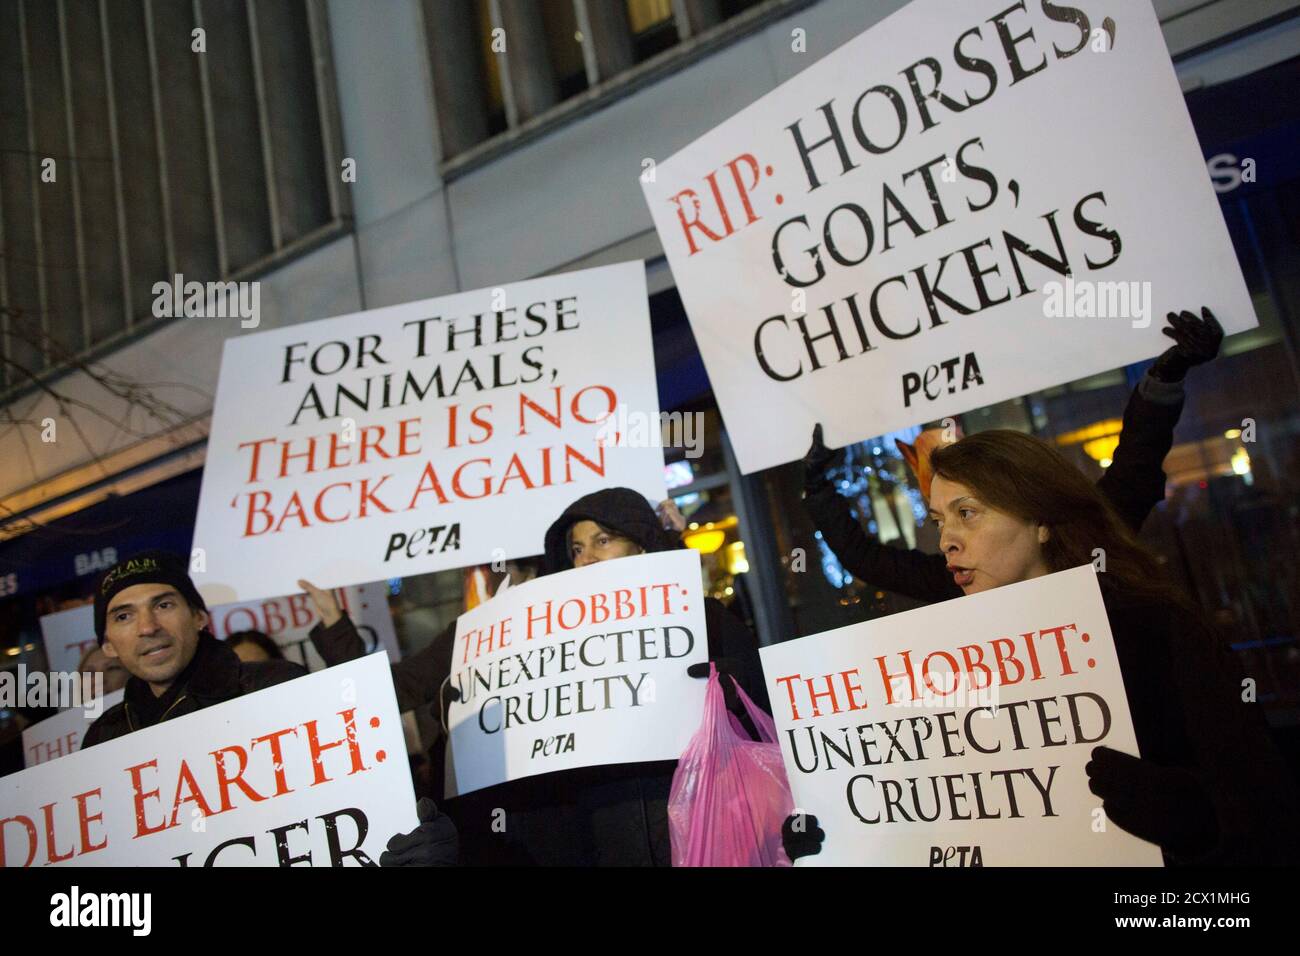 Protesters from the animal rights group PETA protest at the premiere of the film 'The Hobbit: An Unexpected Journey' in New York December 6, 2012. The group claims that numerous animals suffered from fatal injuries during the production of the film. Director Peter Jackson has said some animals died on a farm where they were housed, but none had been hurt during filming.  REUTERS/Andrew Kelly (UNITED STATES - Tags: ENTERTAINMENT CIVIL UNREST) Stock Photo